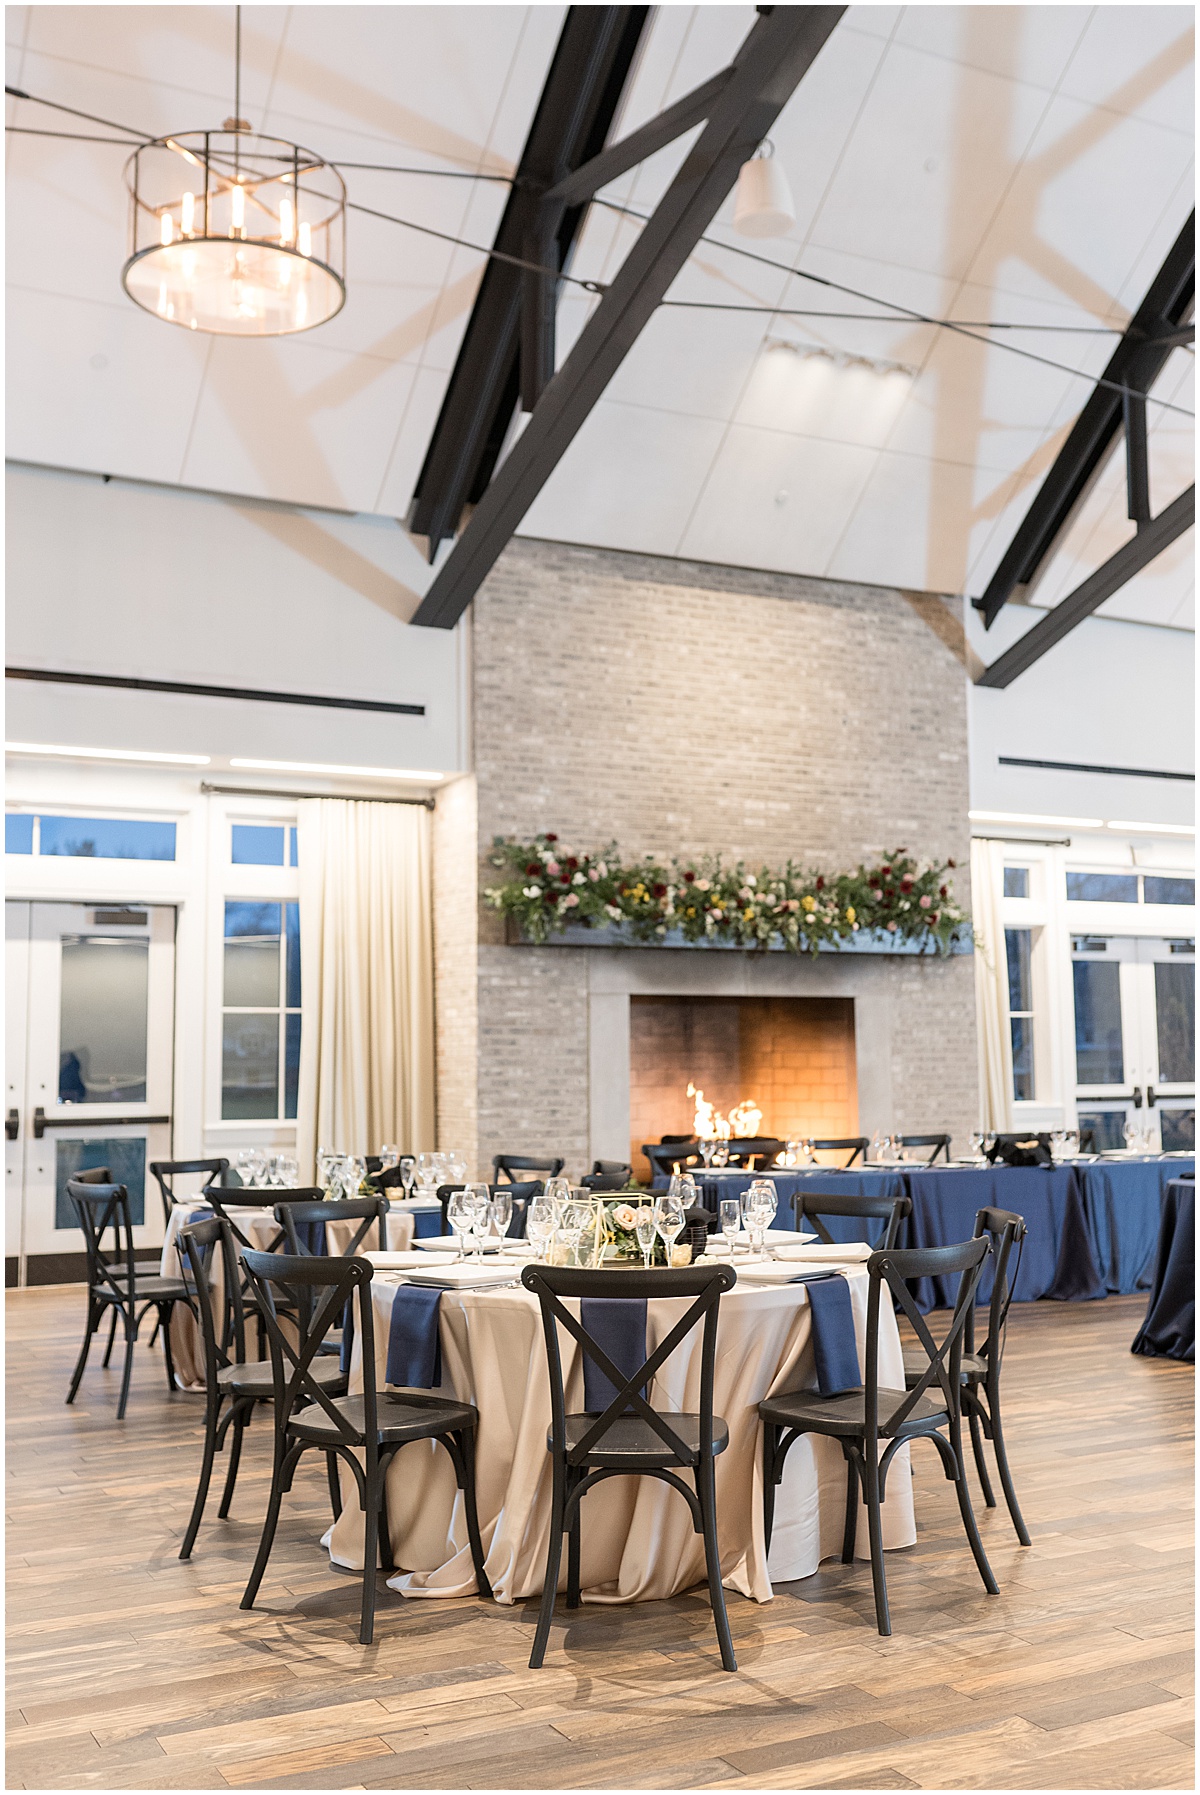 Reception venue details at Iron & Ember events wedding in Carmel, Indiana